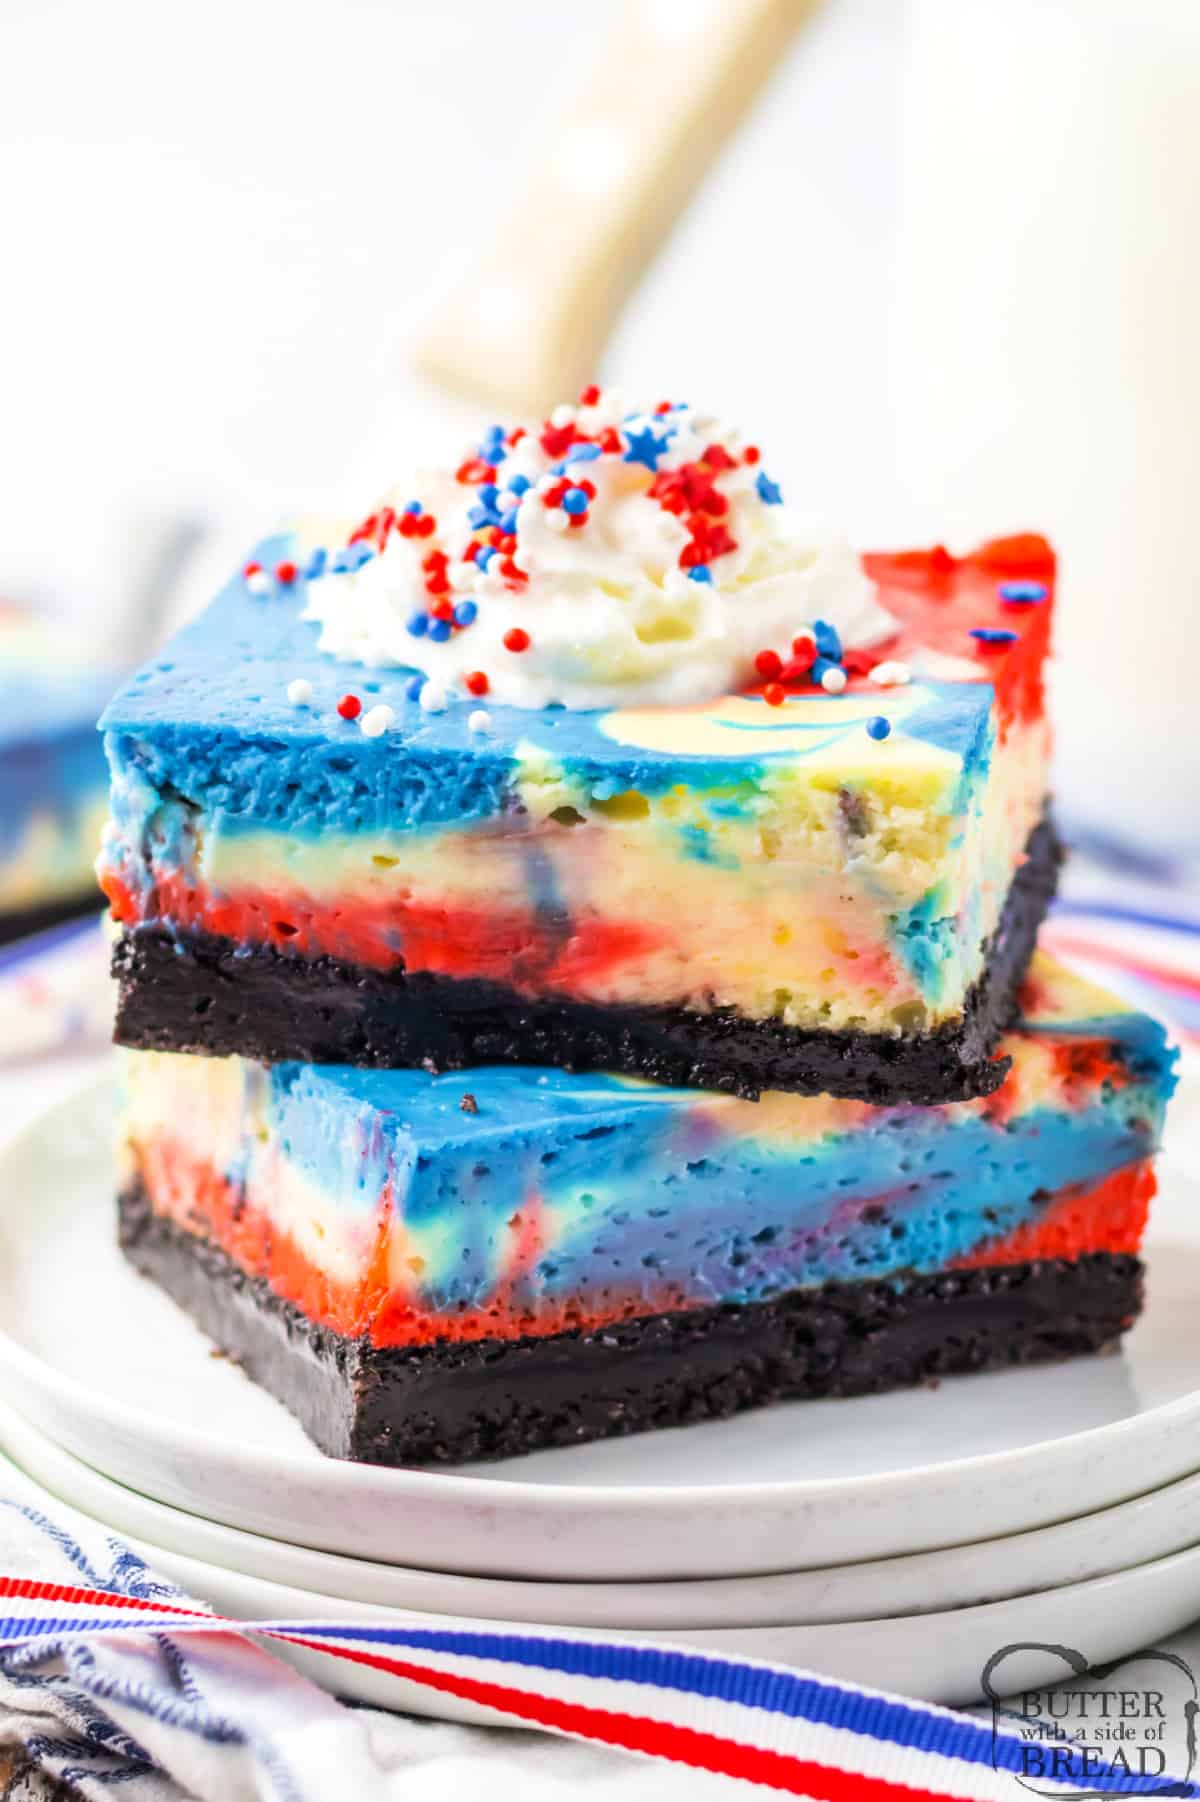 Red, White & Blue Cheesecake Bars are perfect for the 4th of July, Memorial Day, or any other patriotic occasion! Add a simple cheesecake filling to an Oreo crust to make this delicious dessert recipe!